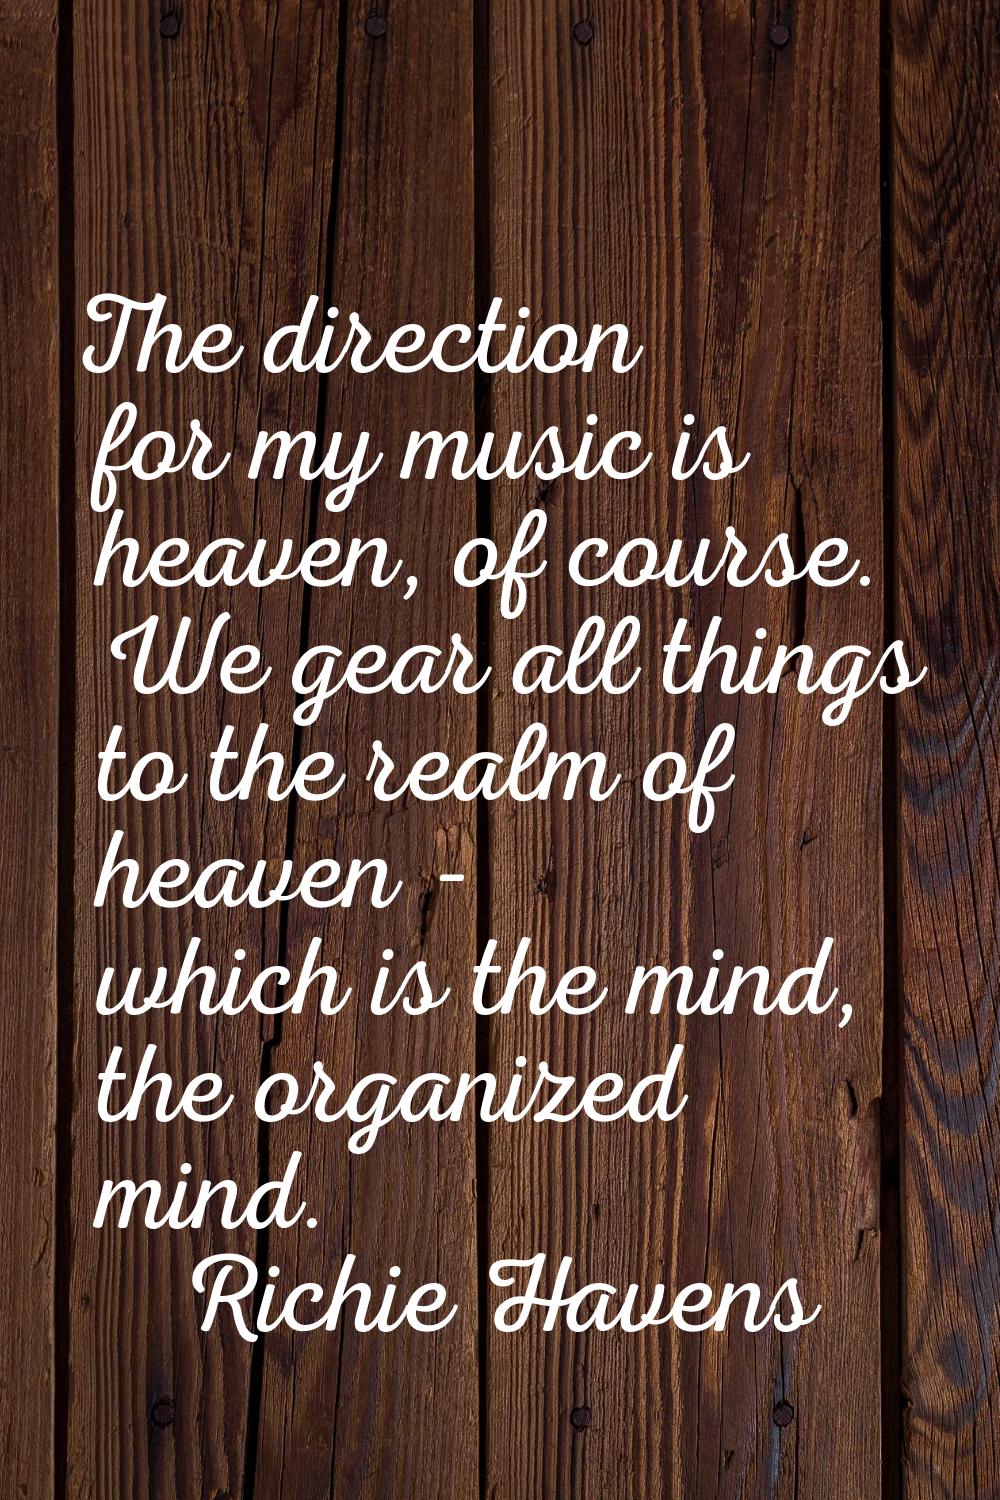 The direction for my music is heaven, of course. We gear all things to the realm of heaven - which 